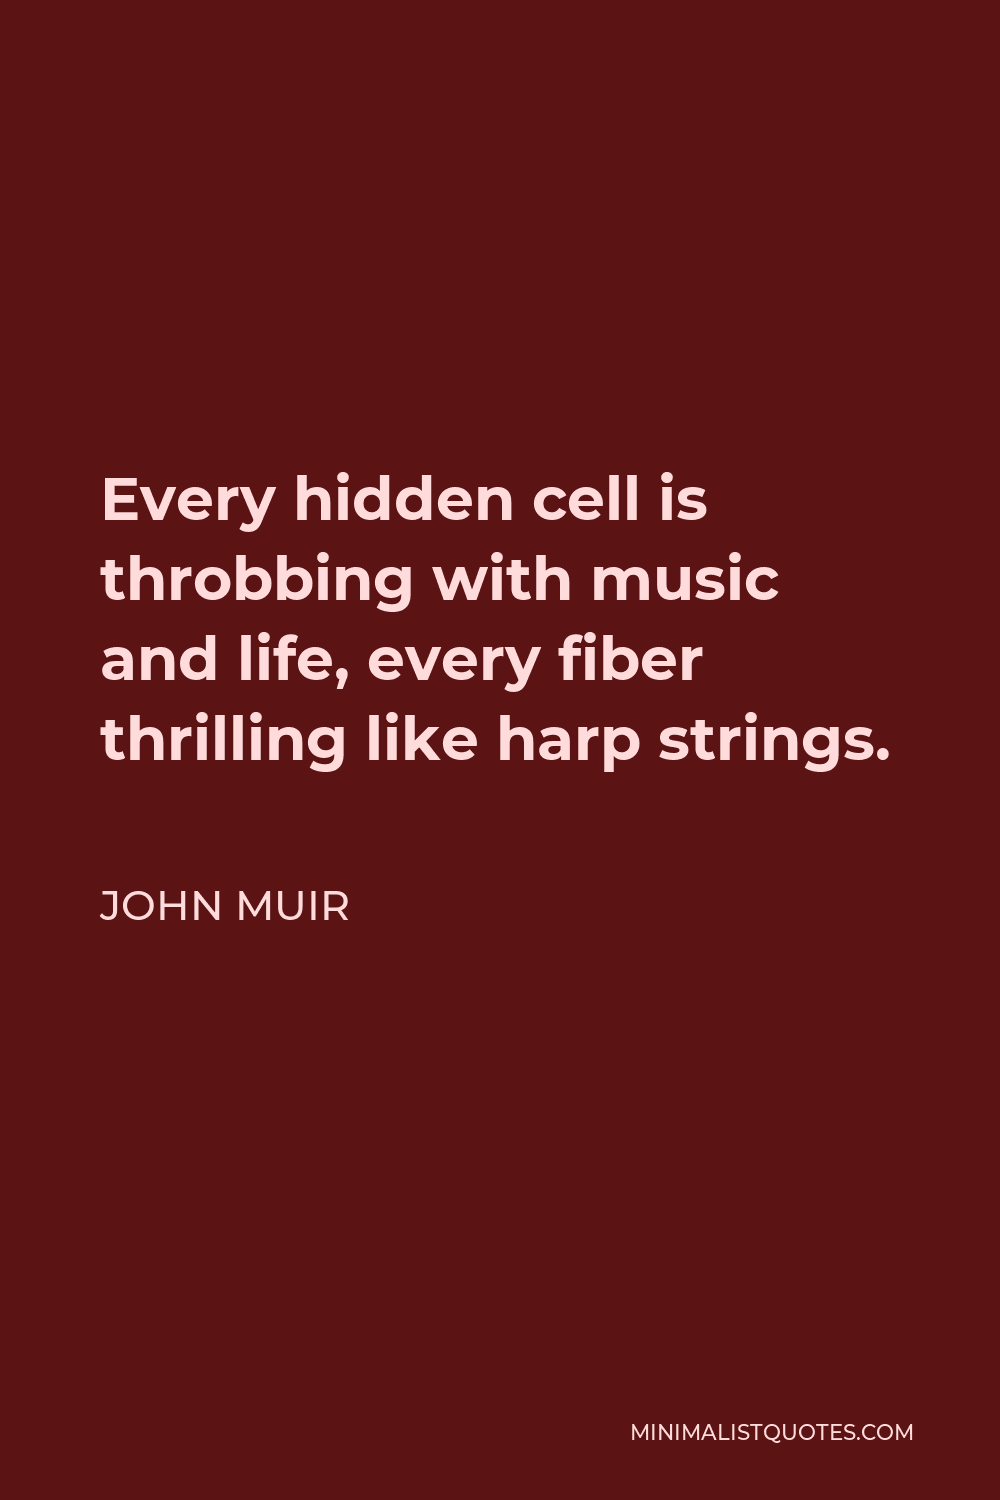 John Muir Quote - Every hidden cell is throbbing with music and life, every fiber thrilling like harp strings.